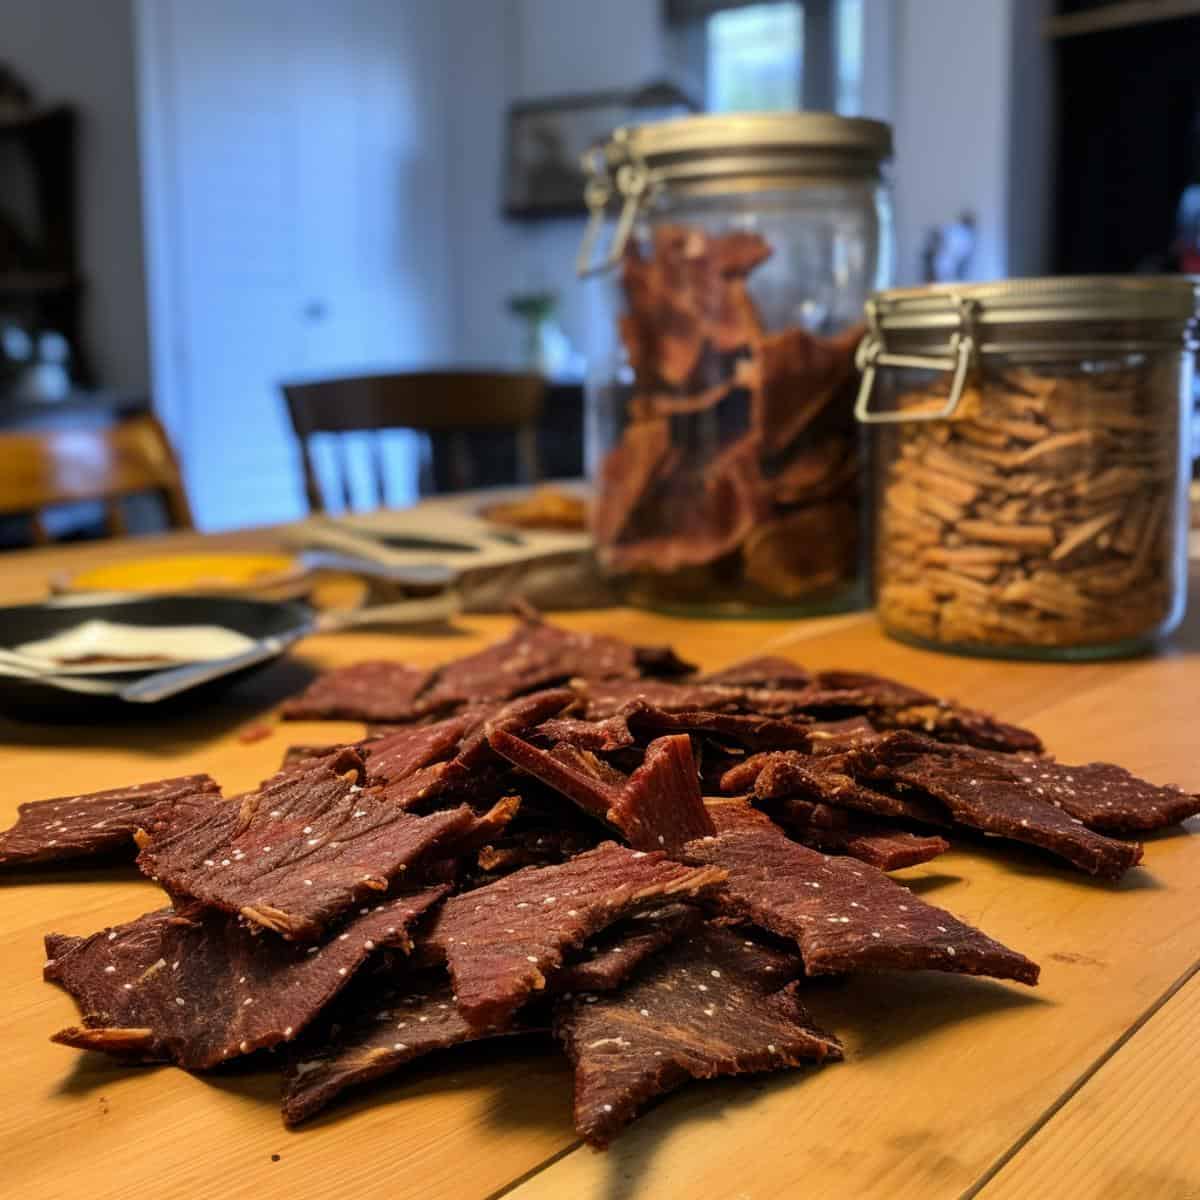 Jerky on a kitchen counter